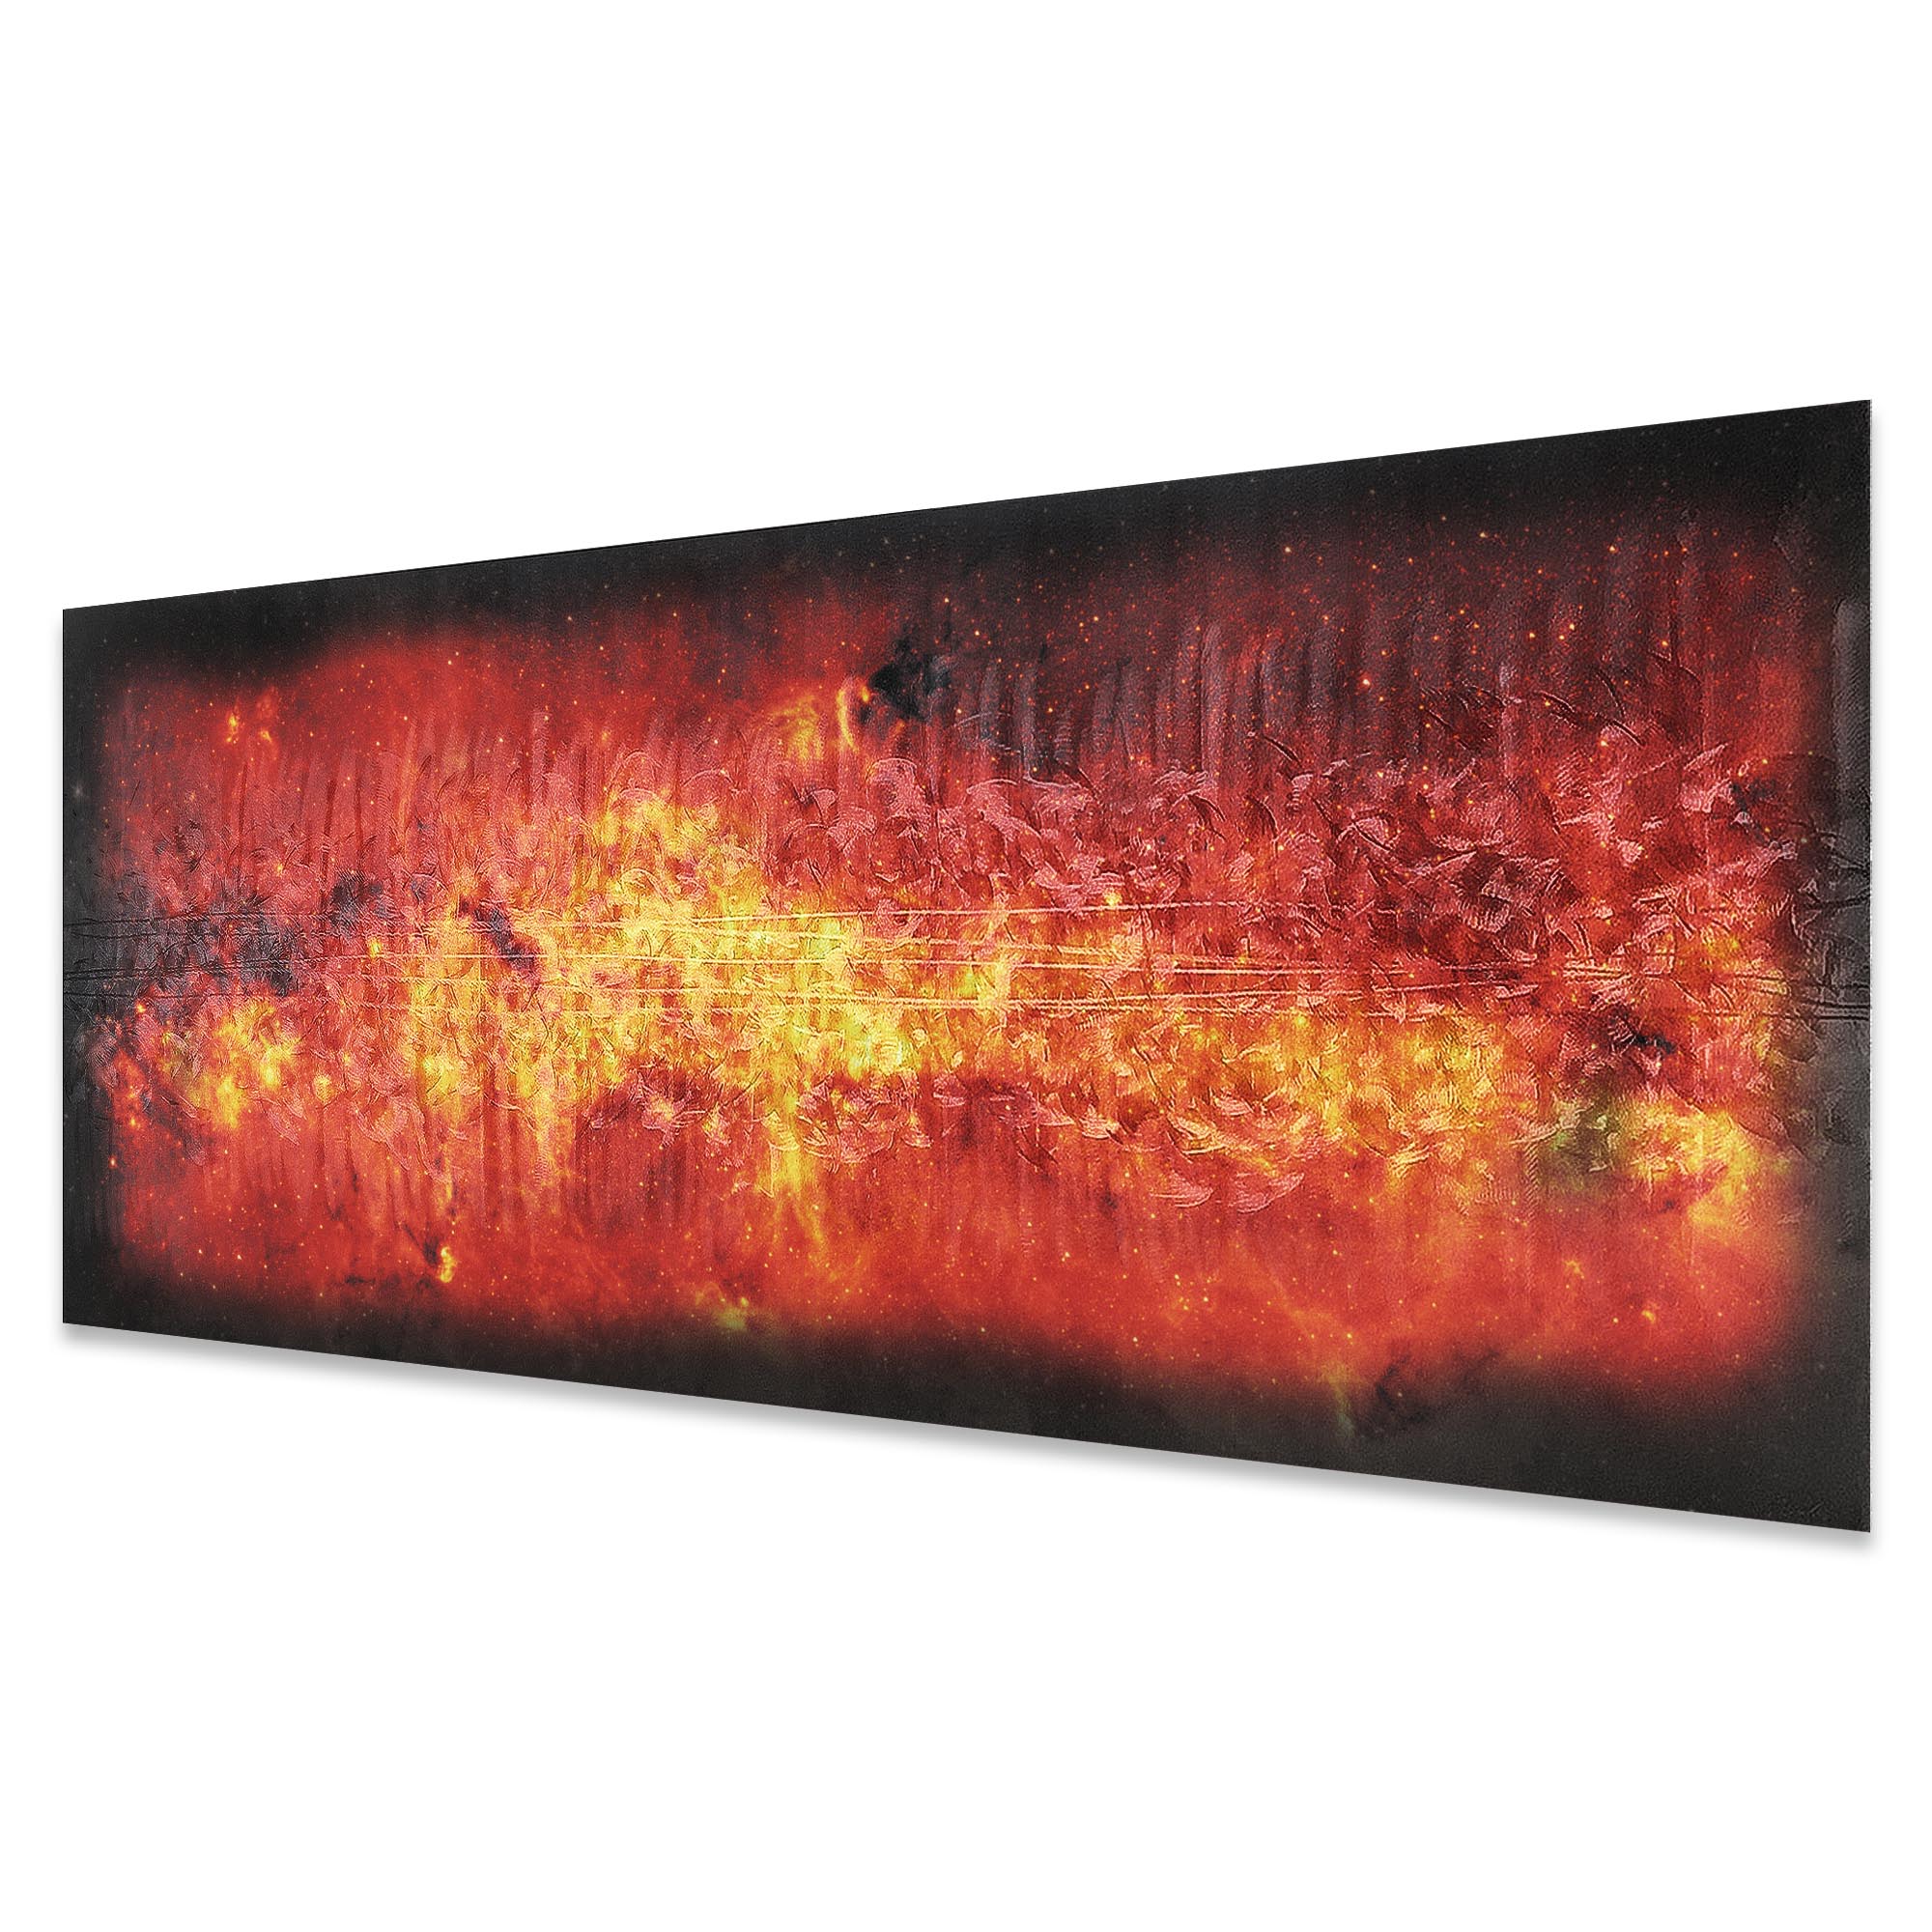 Milky Way Flame by Helena Martin - Original Abstract Art on Ground and Colored Metal - Image 2